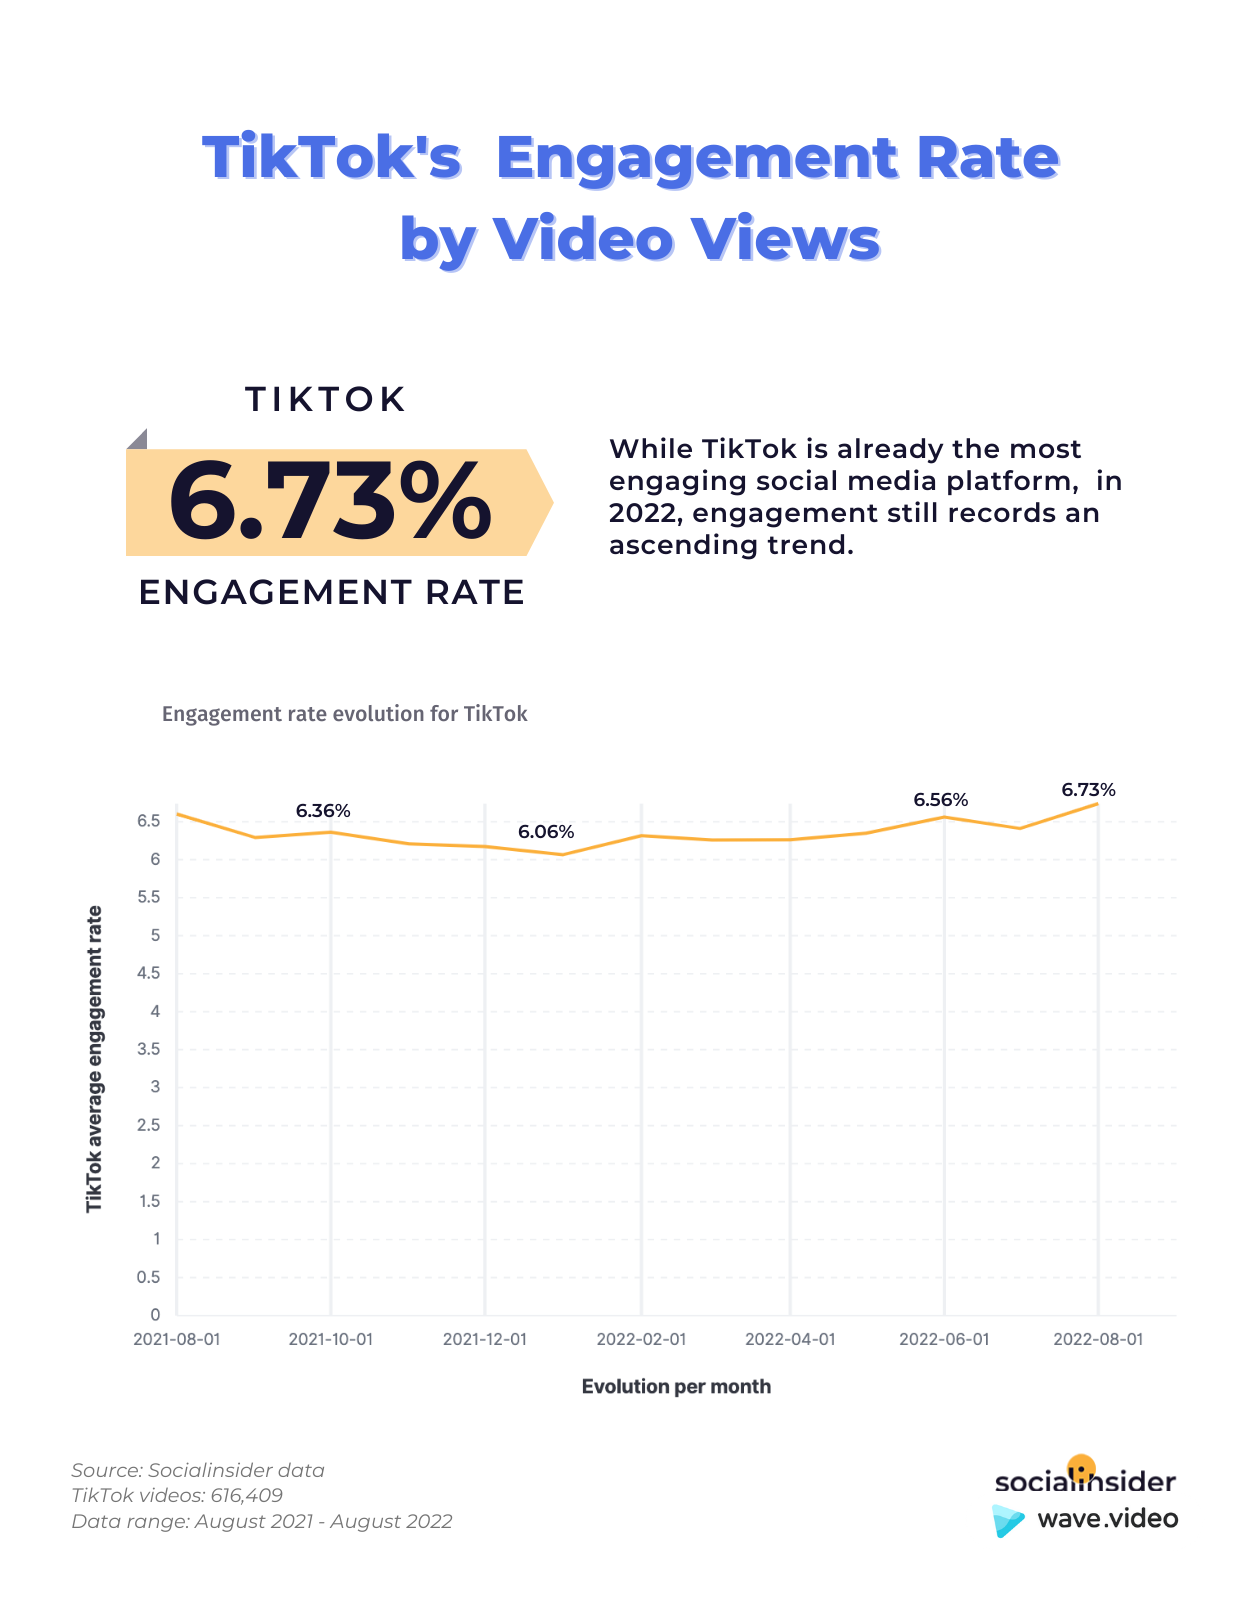 Here is a chart showing what's TikTok's engagement rate in 2022.